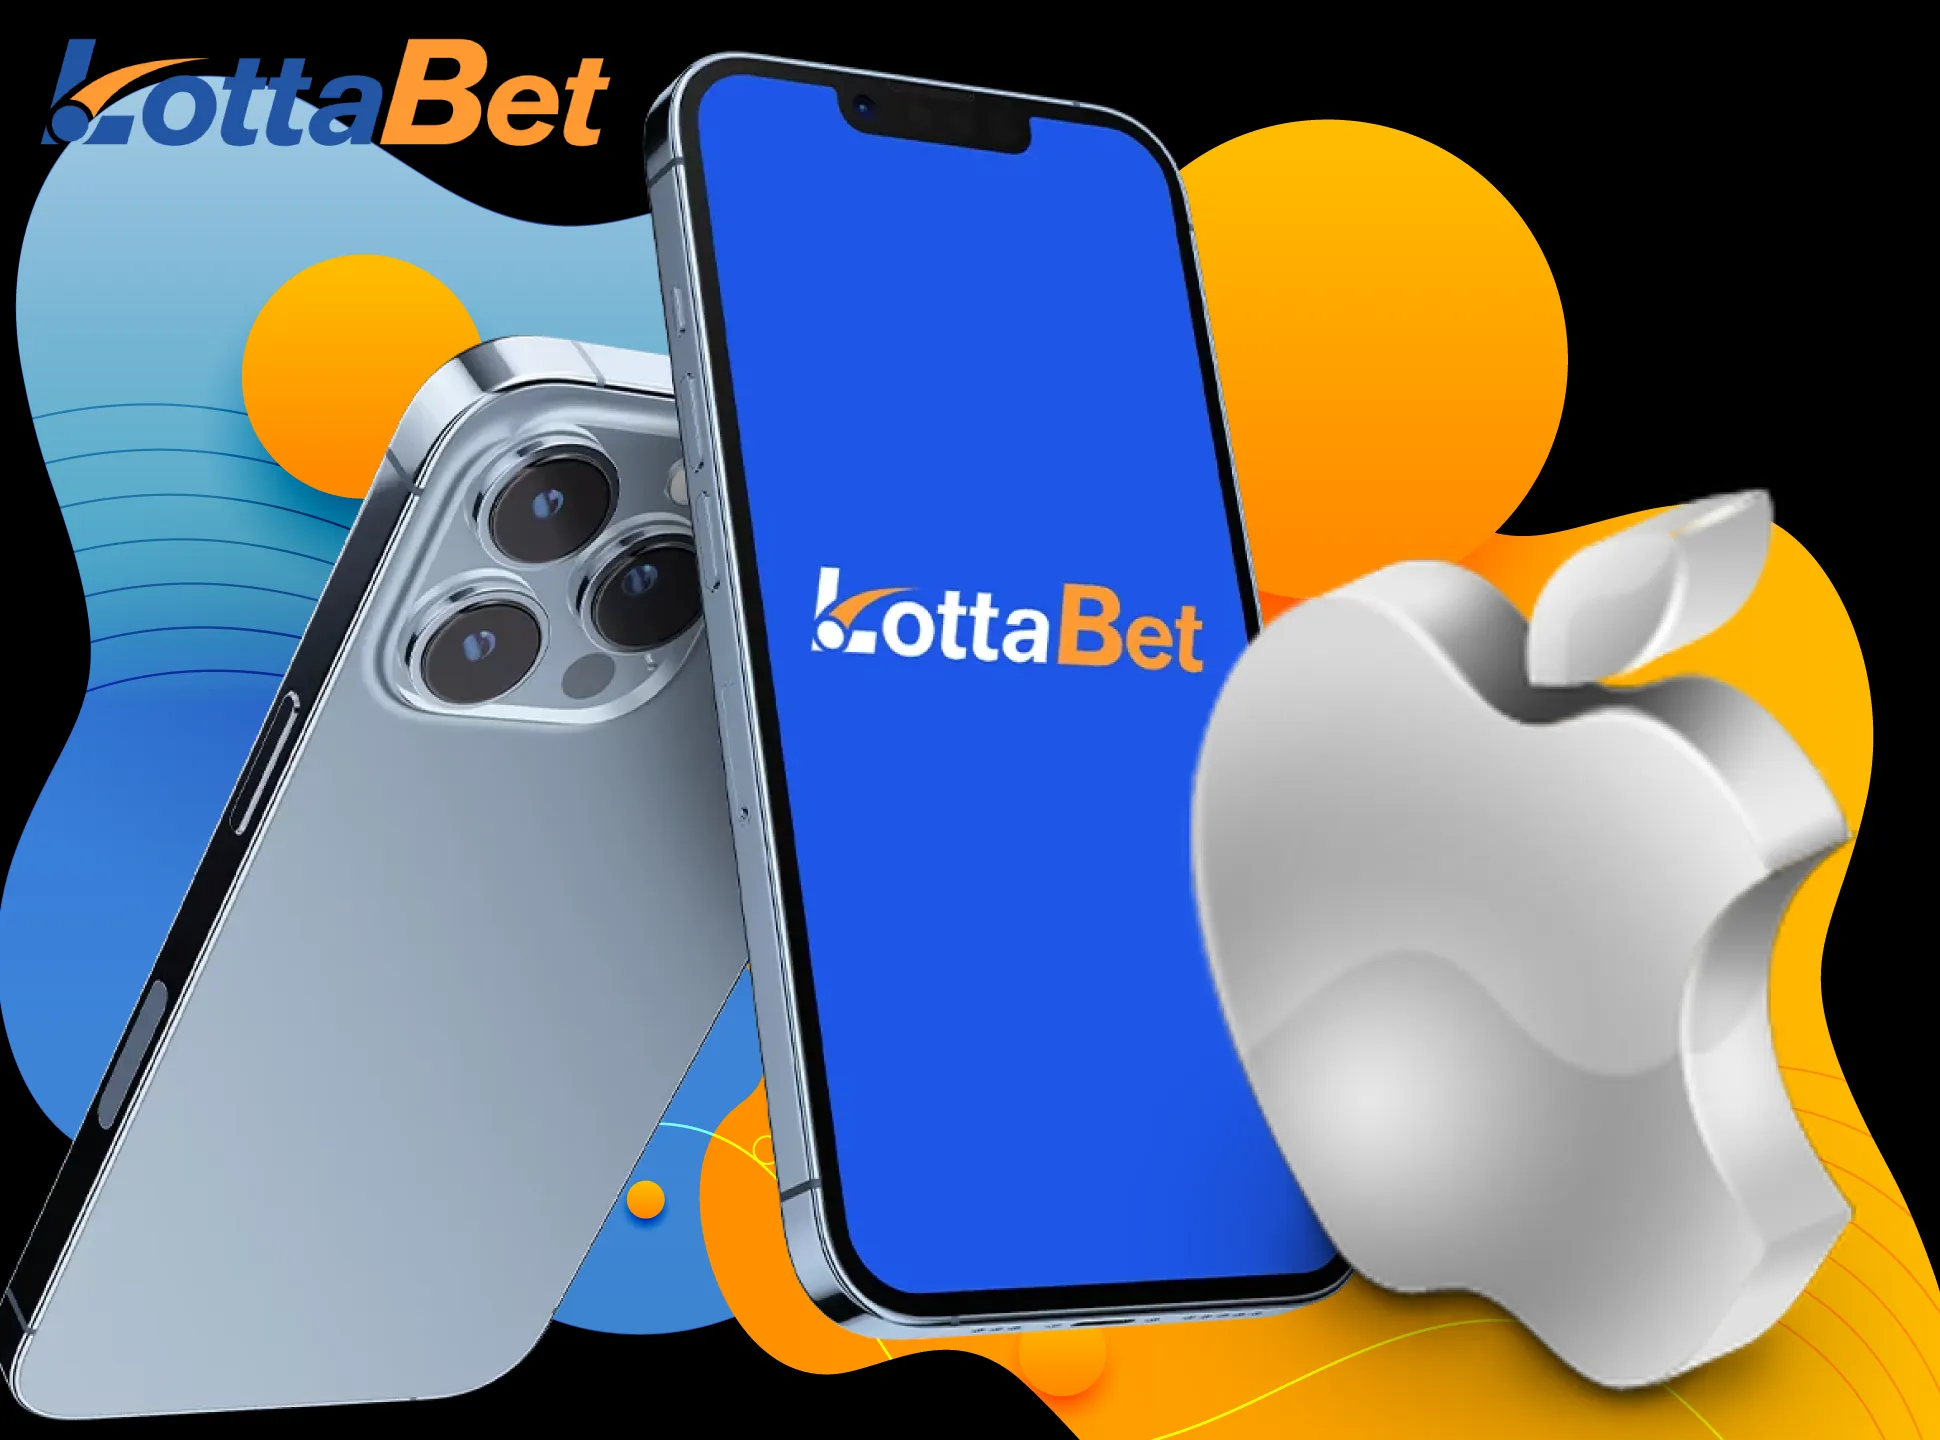 Download the Lottabet app on your iPhone.